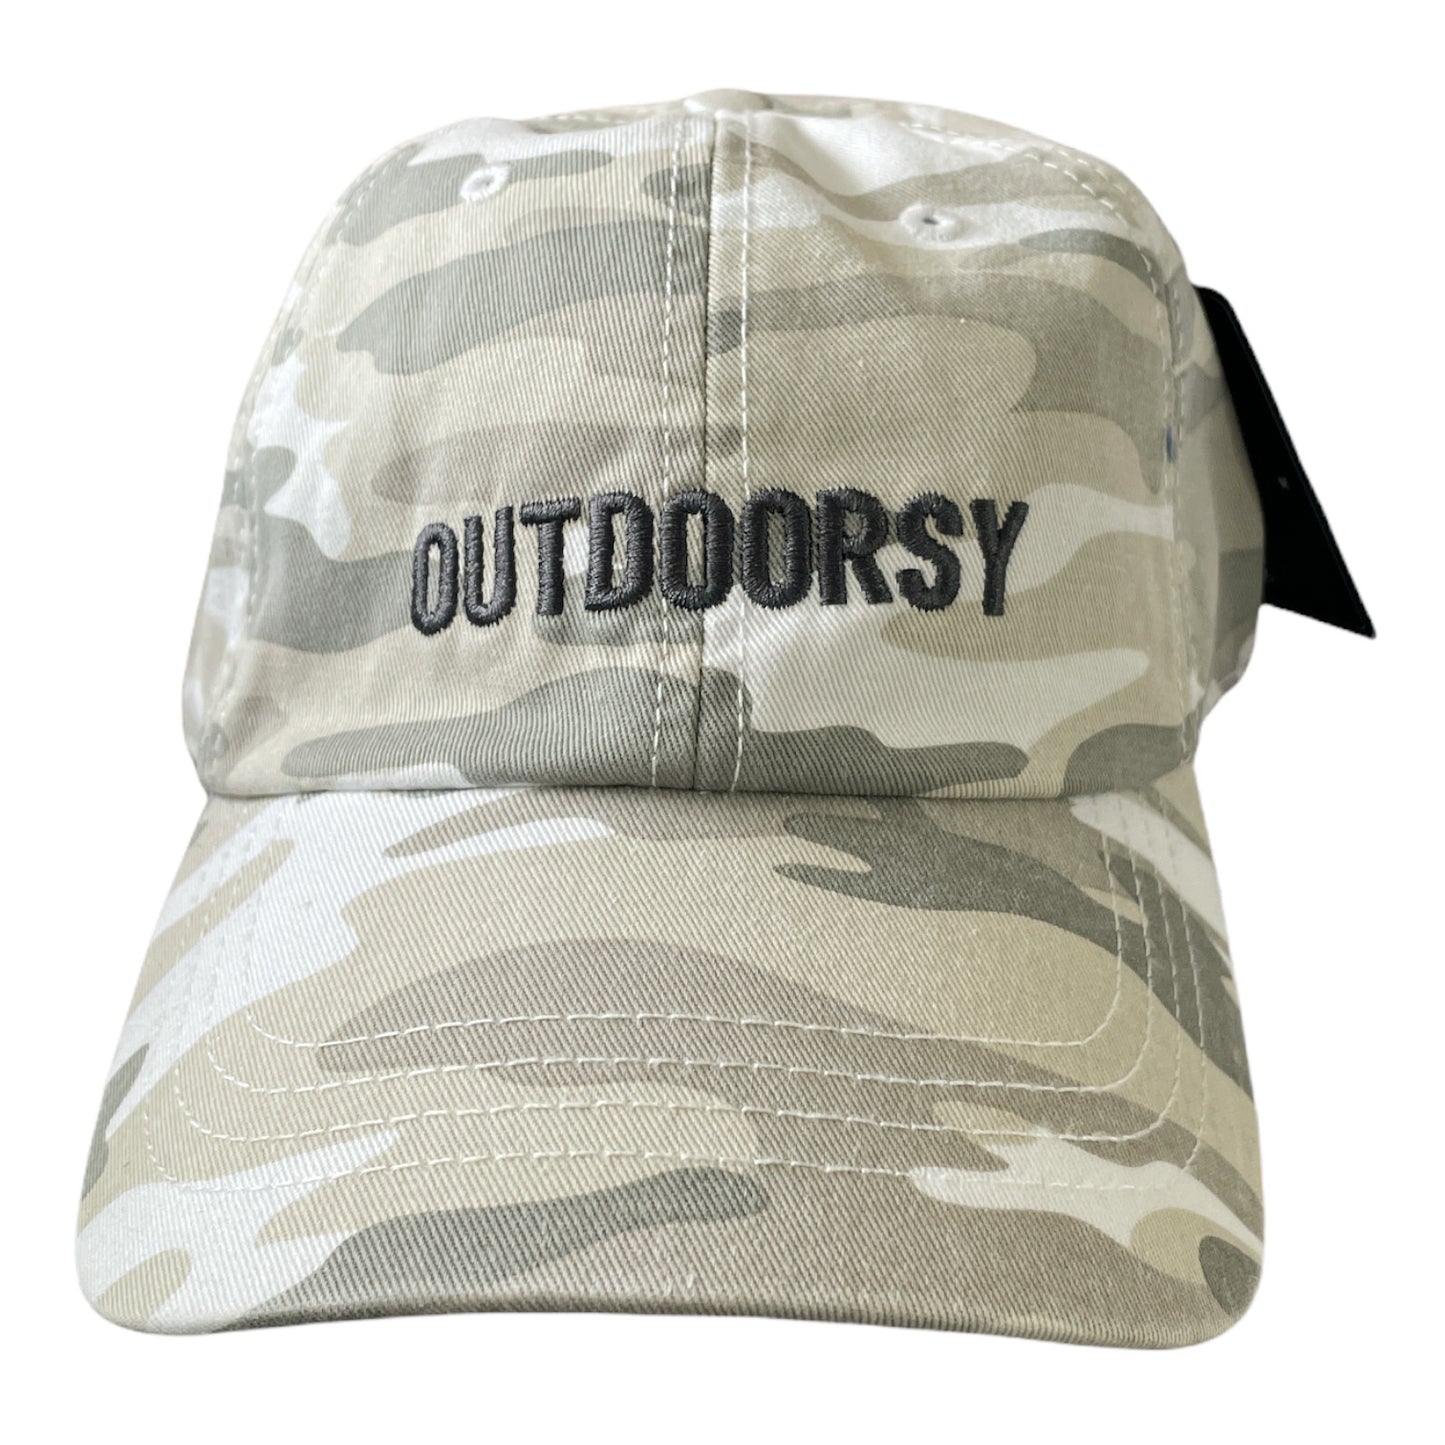 State Of Mine Unisex Camo Outdoorsy Baseball Cap, One Size Fits Most